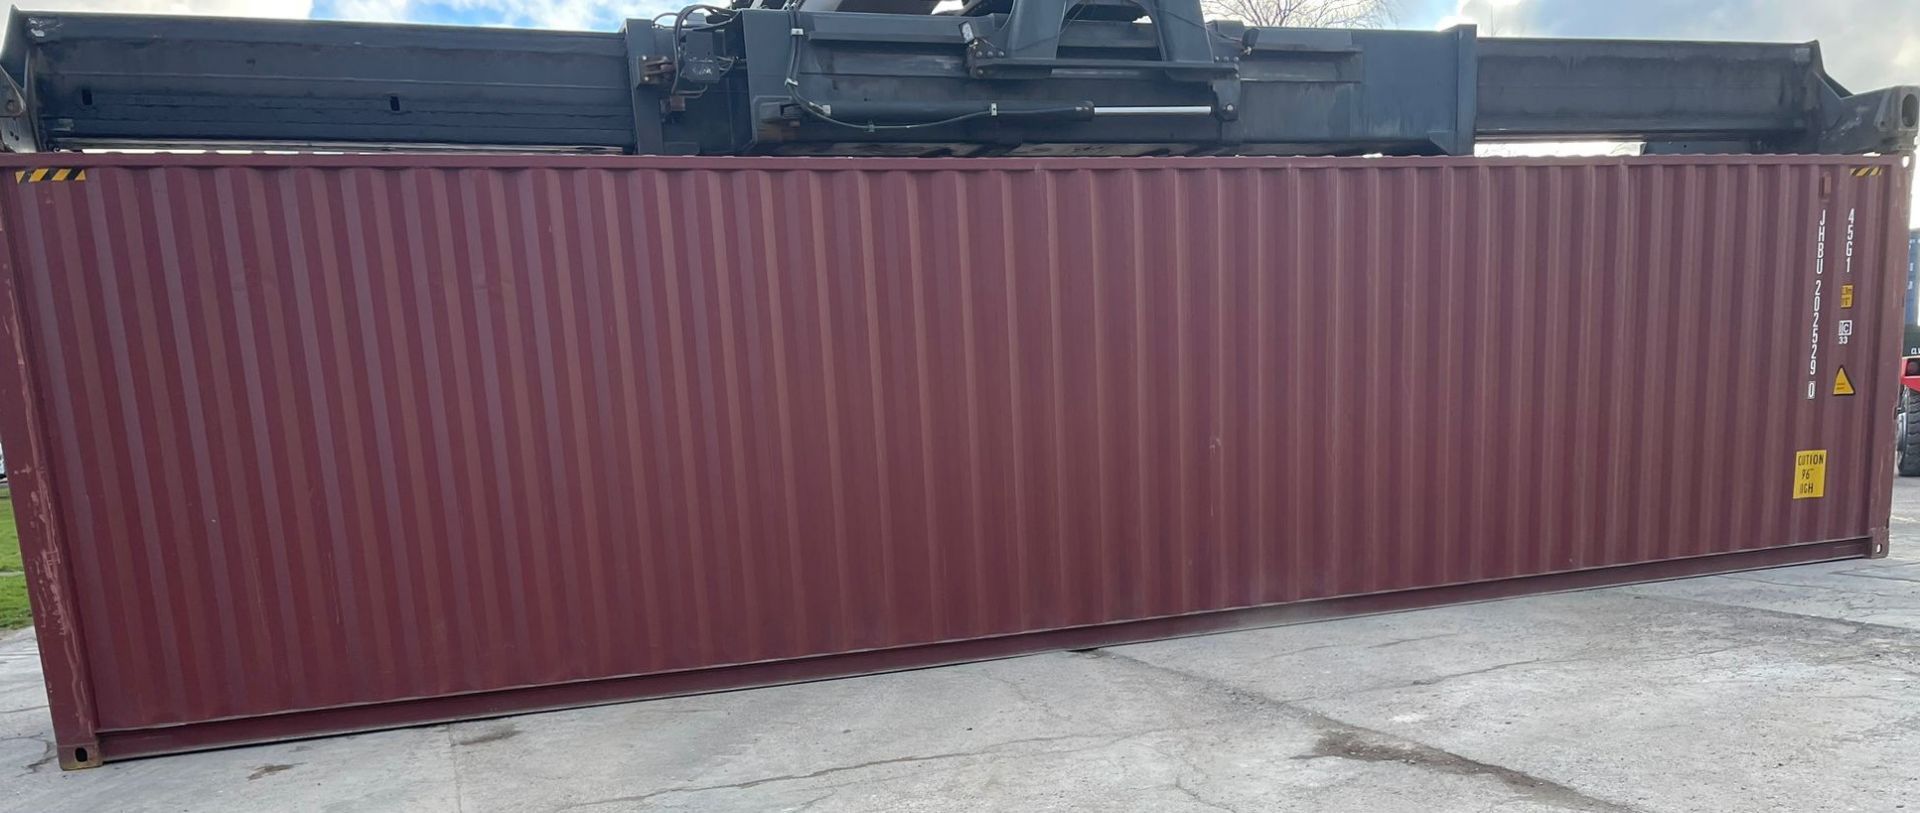 40ft HC Shipping Container - ref JHBU2025290 - NO RESERVE - Image 3 of 6